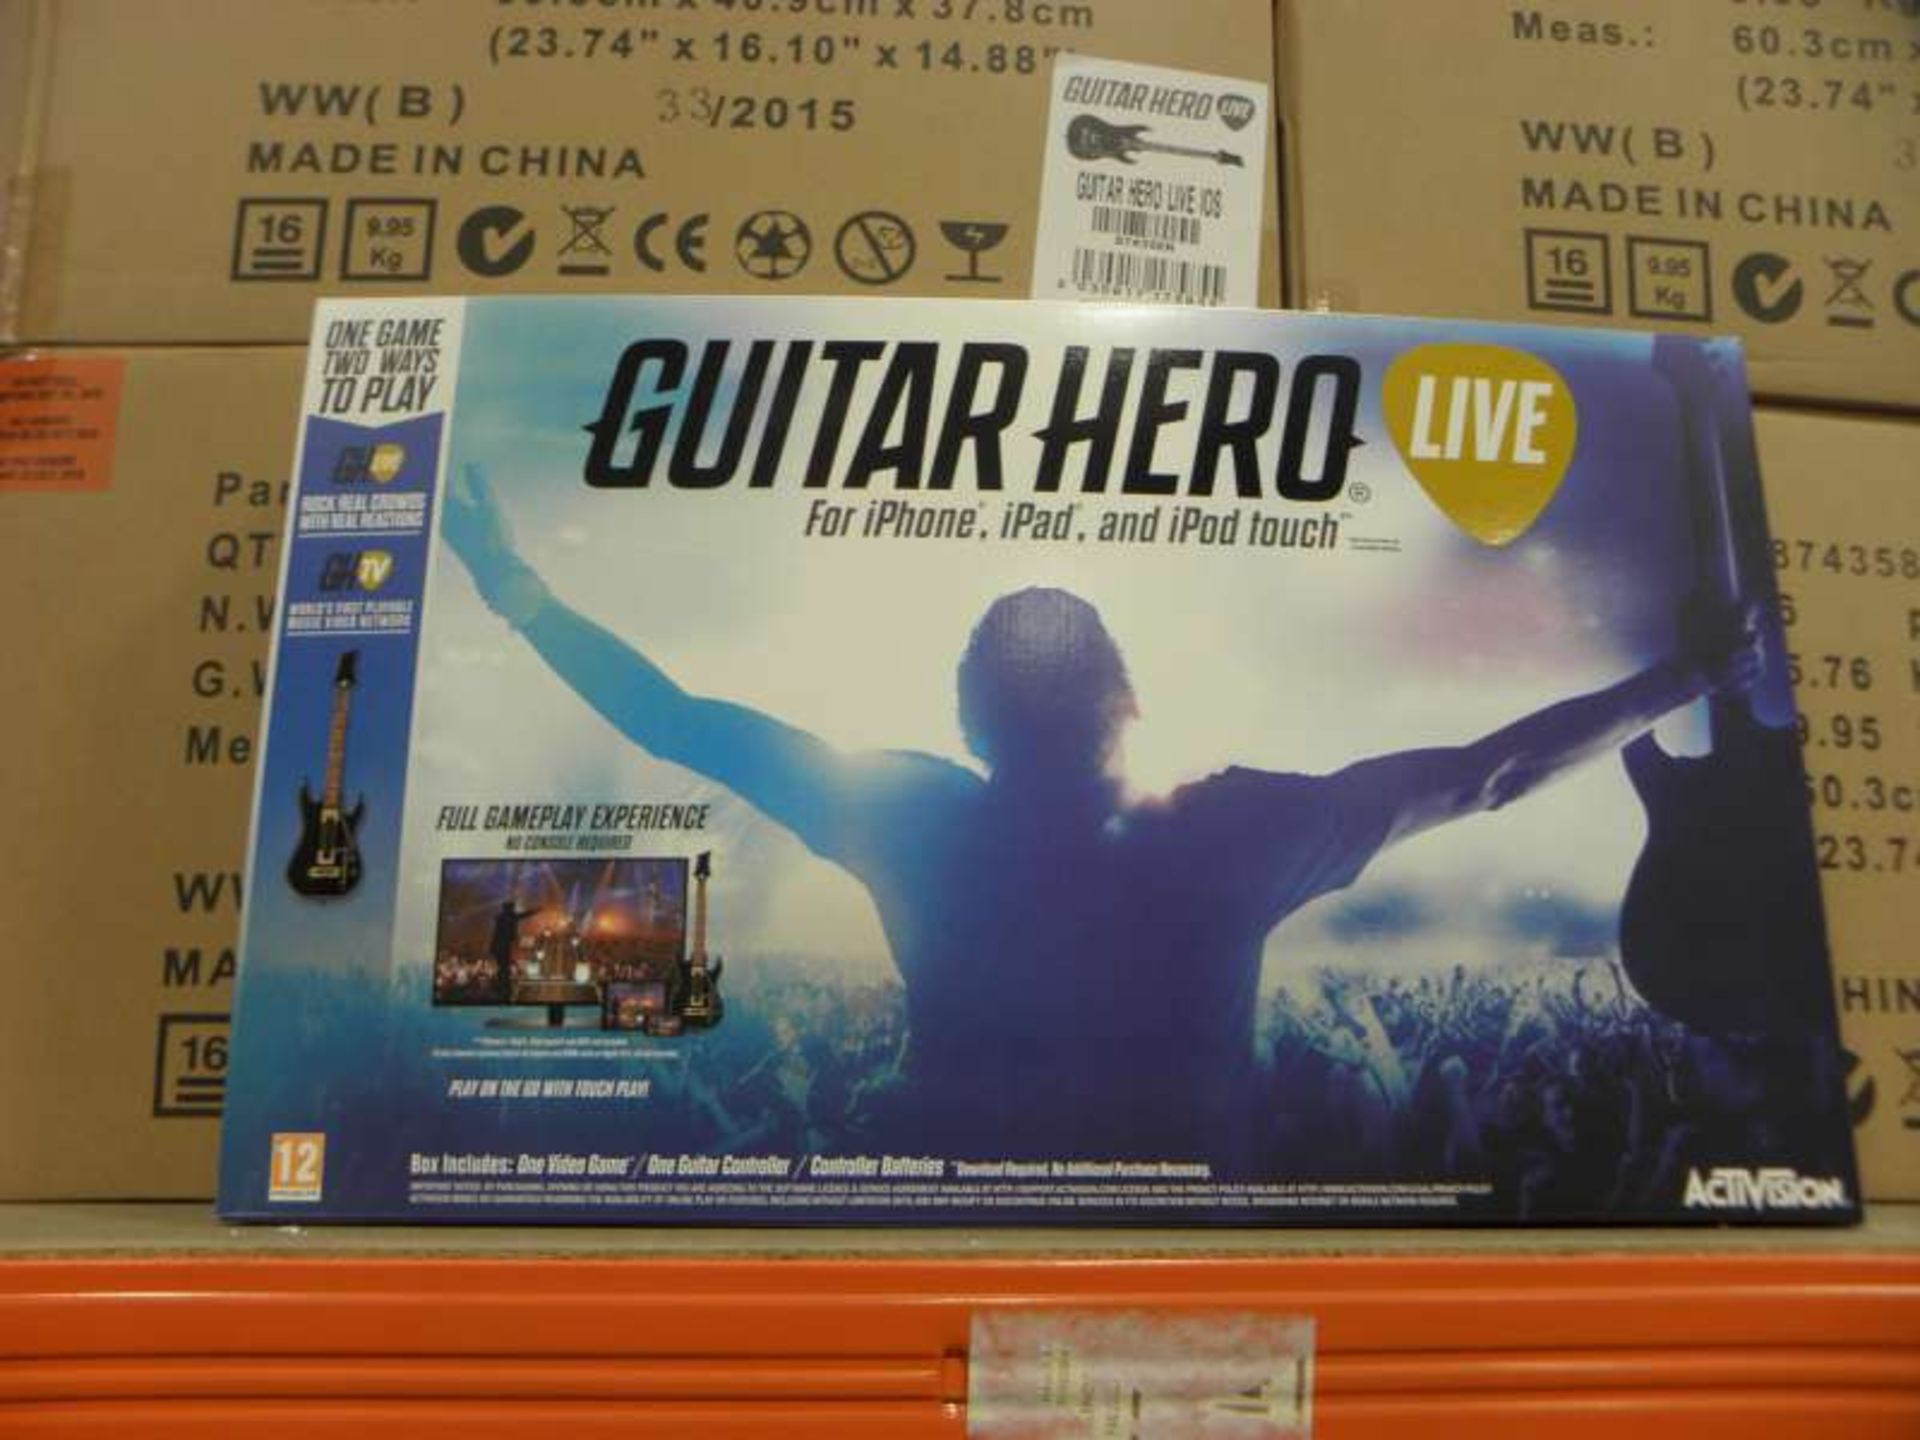 30 X GUITAR HERO LIVE FOR IPHONE, IPAD, IPOD IN 5 BOXES ( REQUIRE BATTERYS )